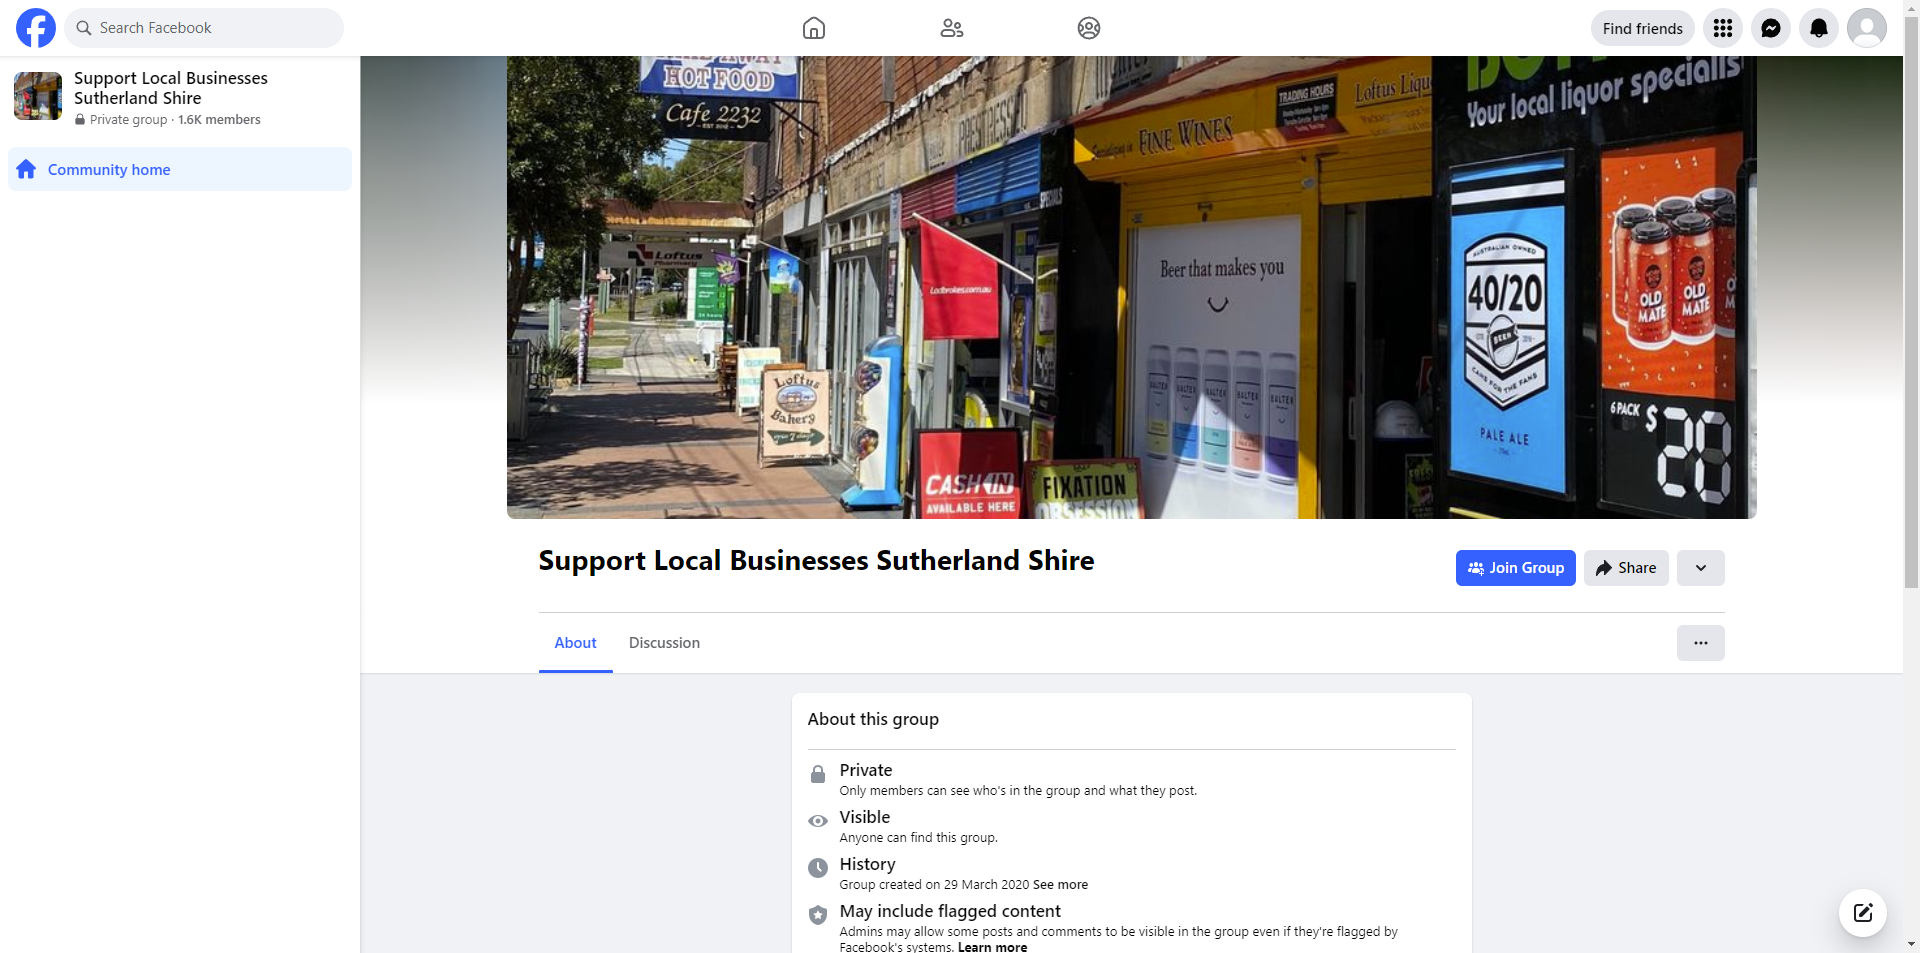 Support Local Businesses Sutherland Shire